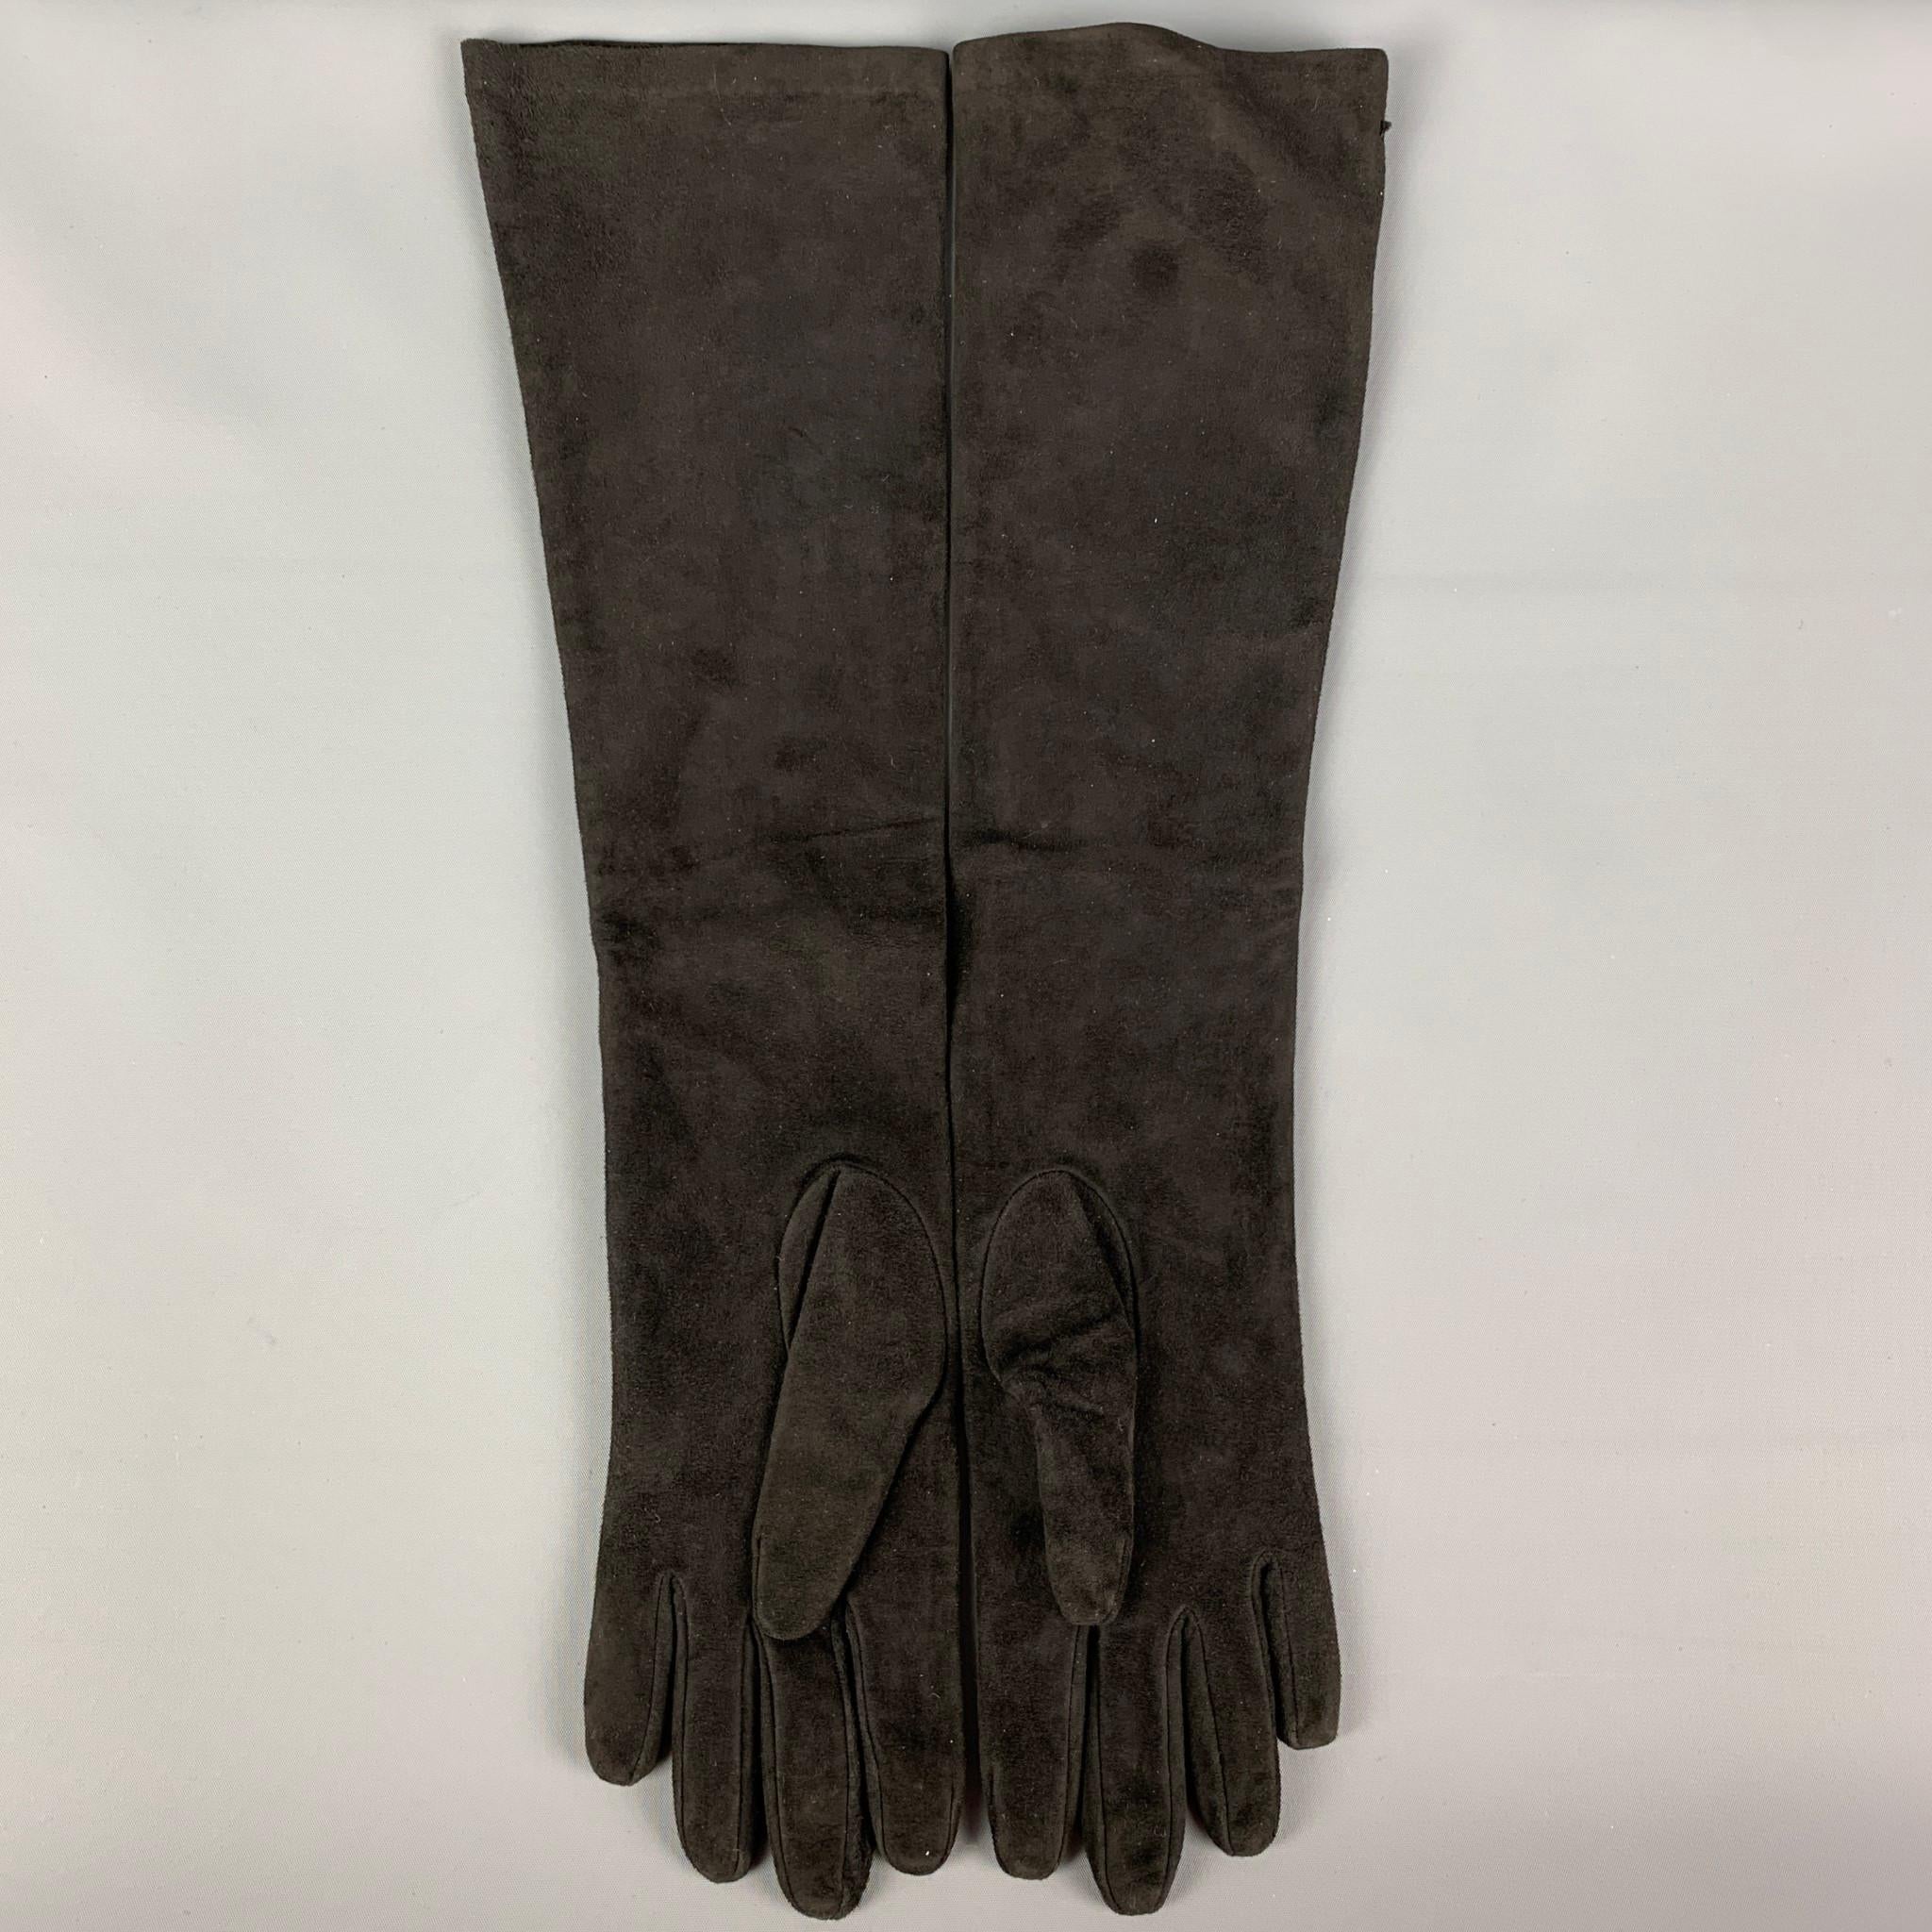 RALPH LAUREN 'Collection' long gloves comes in a black suede and silk lining. Made in Italy.

New With Tags. 
Marked: 7
Original Retail Price: $425.00

Measurements:

Width: 5 in.
Height: 19 in. 